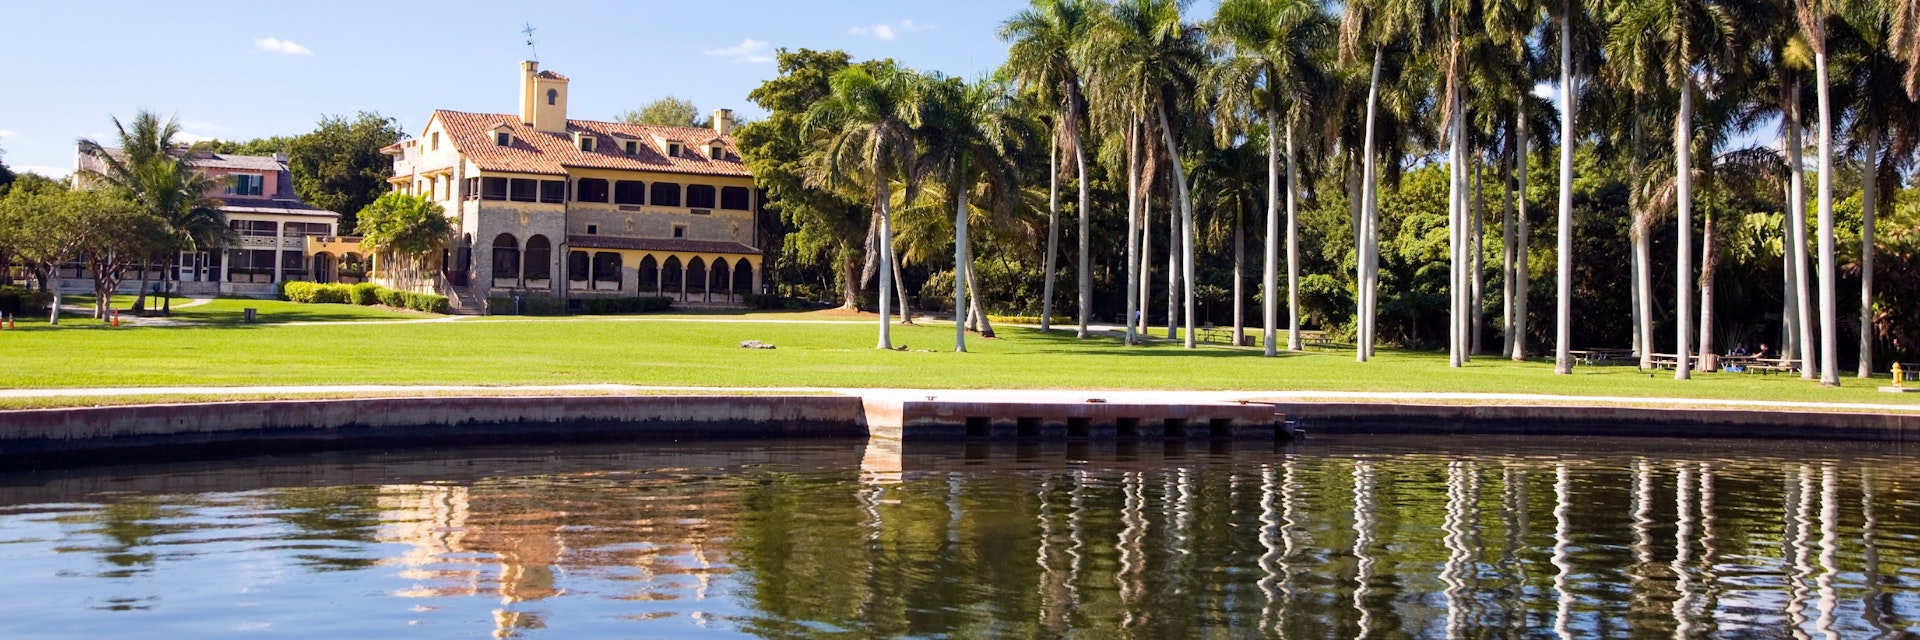 Stone House in Deering estates at south Miami